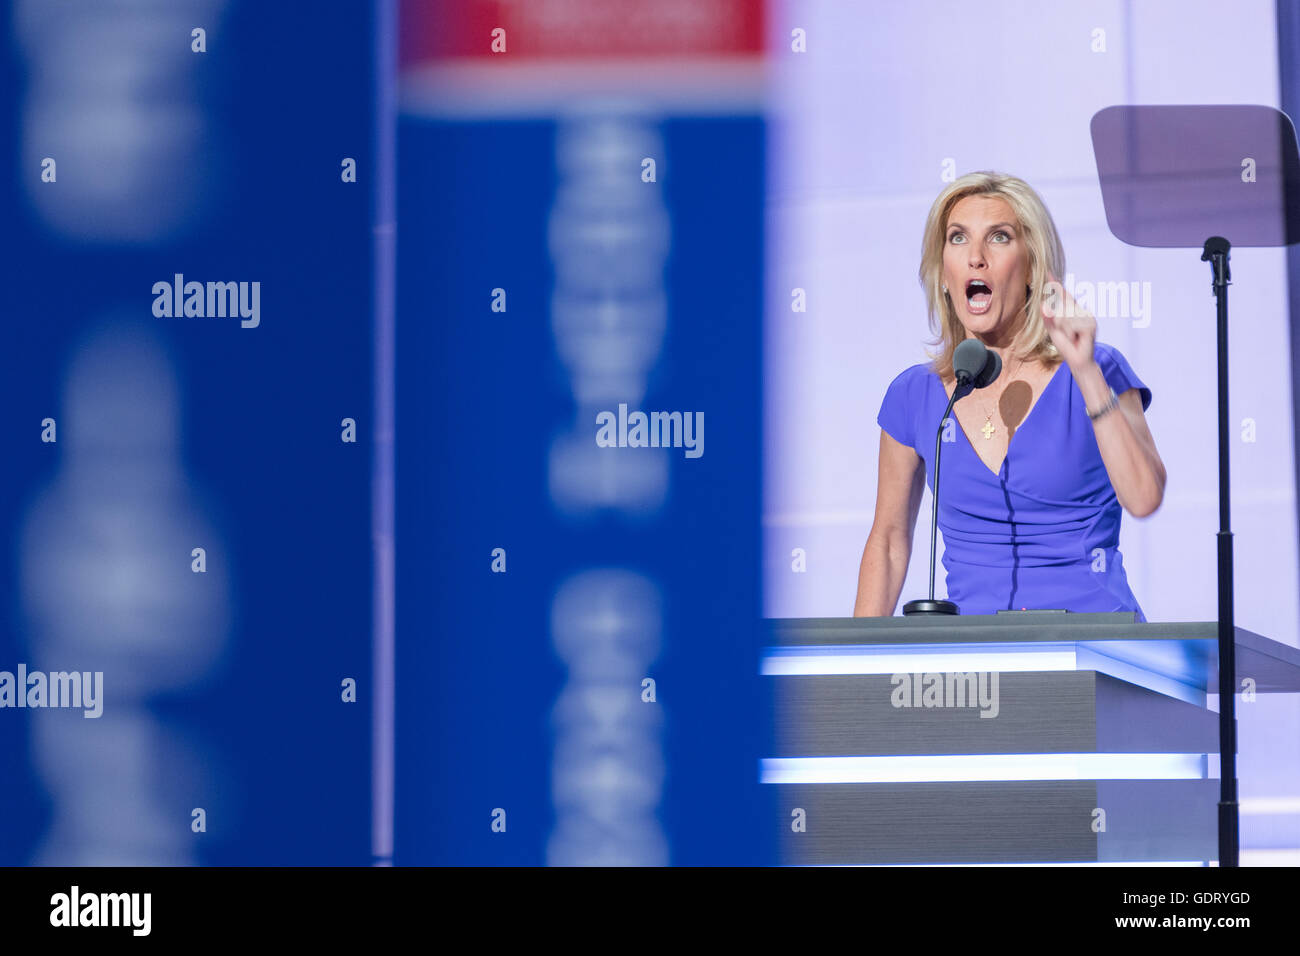 Cleveland, Ohio, USA. 20th July, 2016. Conservative Talk show personality Laura Ingraham addresses the third day of the Republican National Convention July 20, 2016 in Cleveland, Ohio. Credit:  Planetpix/Alamy Live News Stock Photo